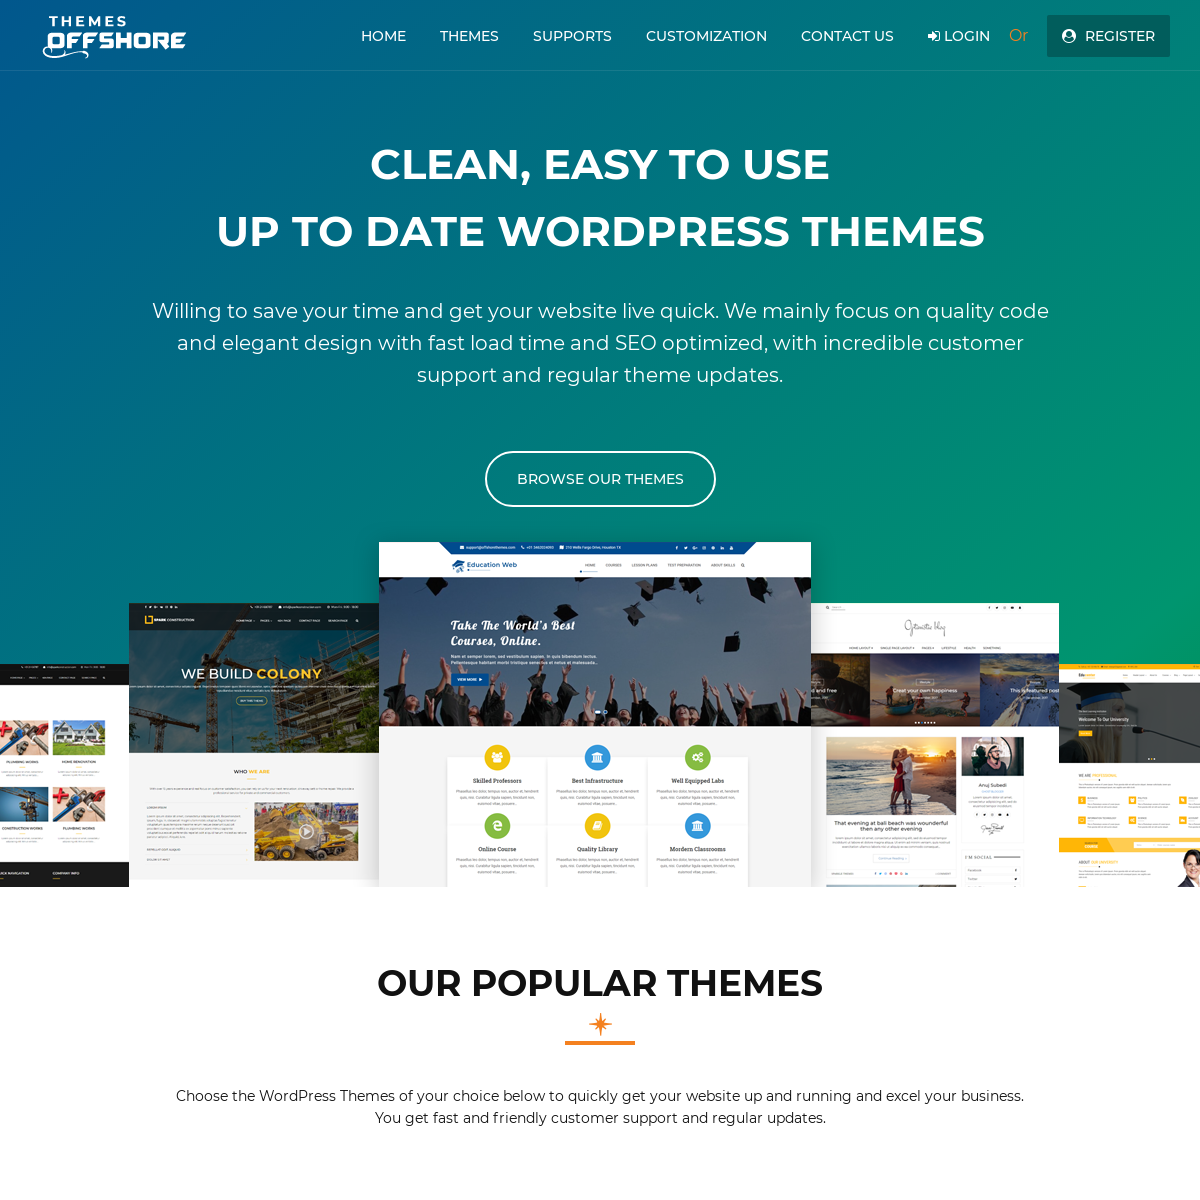 A complete backup of offshorethemes.com